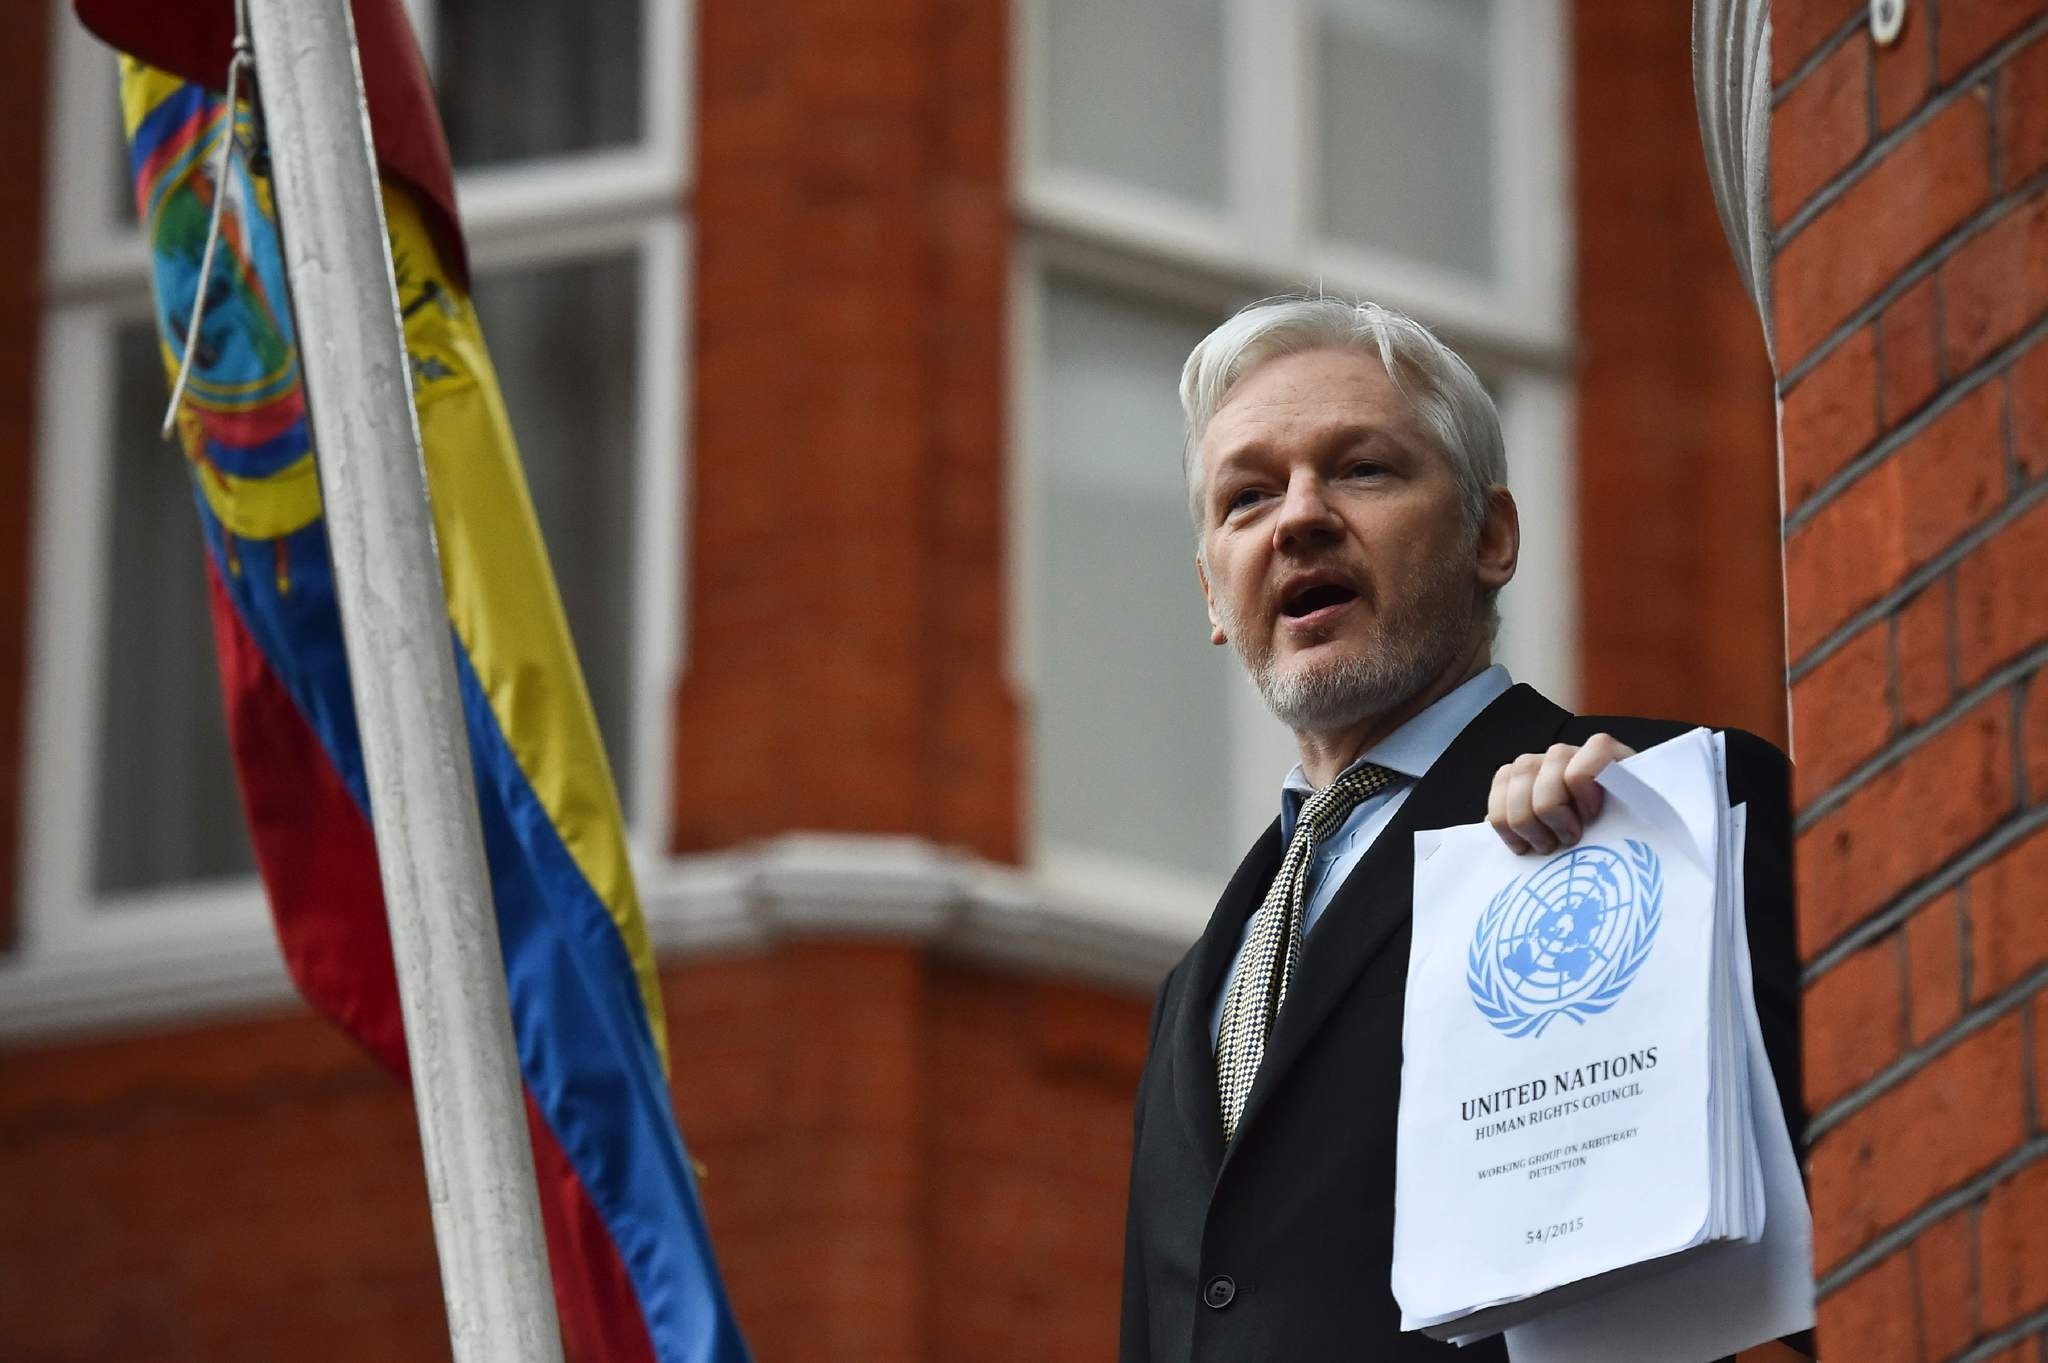 This file photo taken on February 5, 2016 shows WikiLeaks founder Julian Assange addressing the media on his case from the balcony of the Ecuadorian embassy in central London. (AFP Photo)